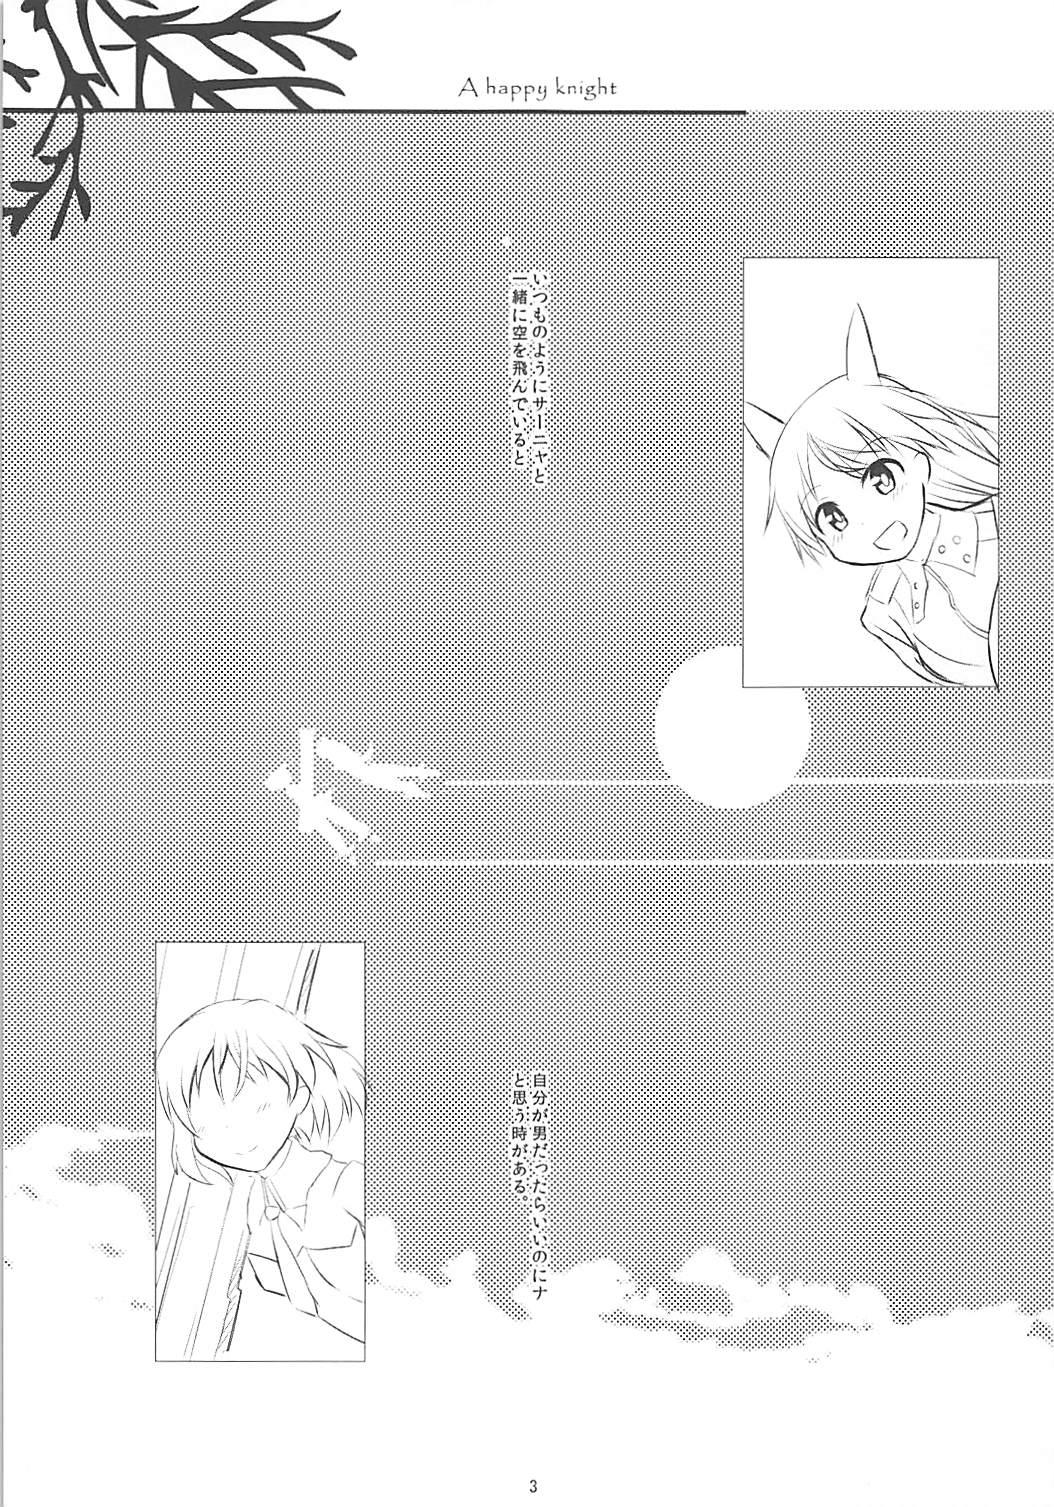 Fake Tits A happy knight - Strike witches Hottie - Page 2